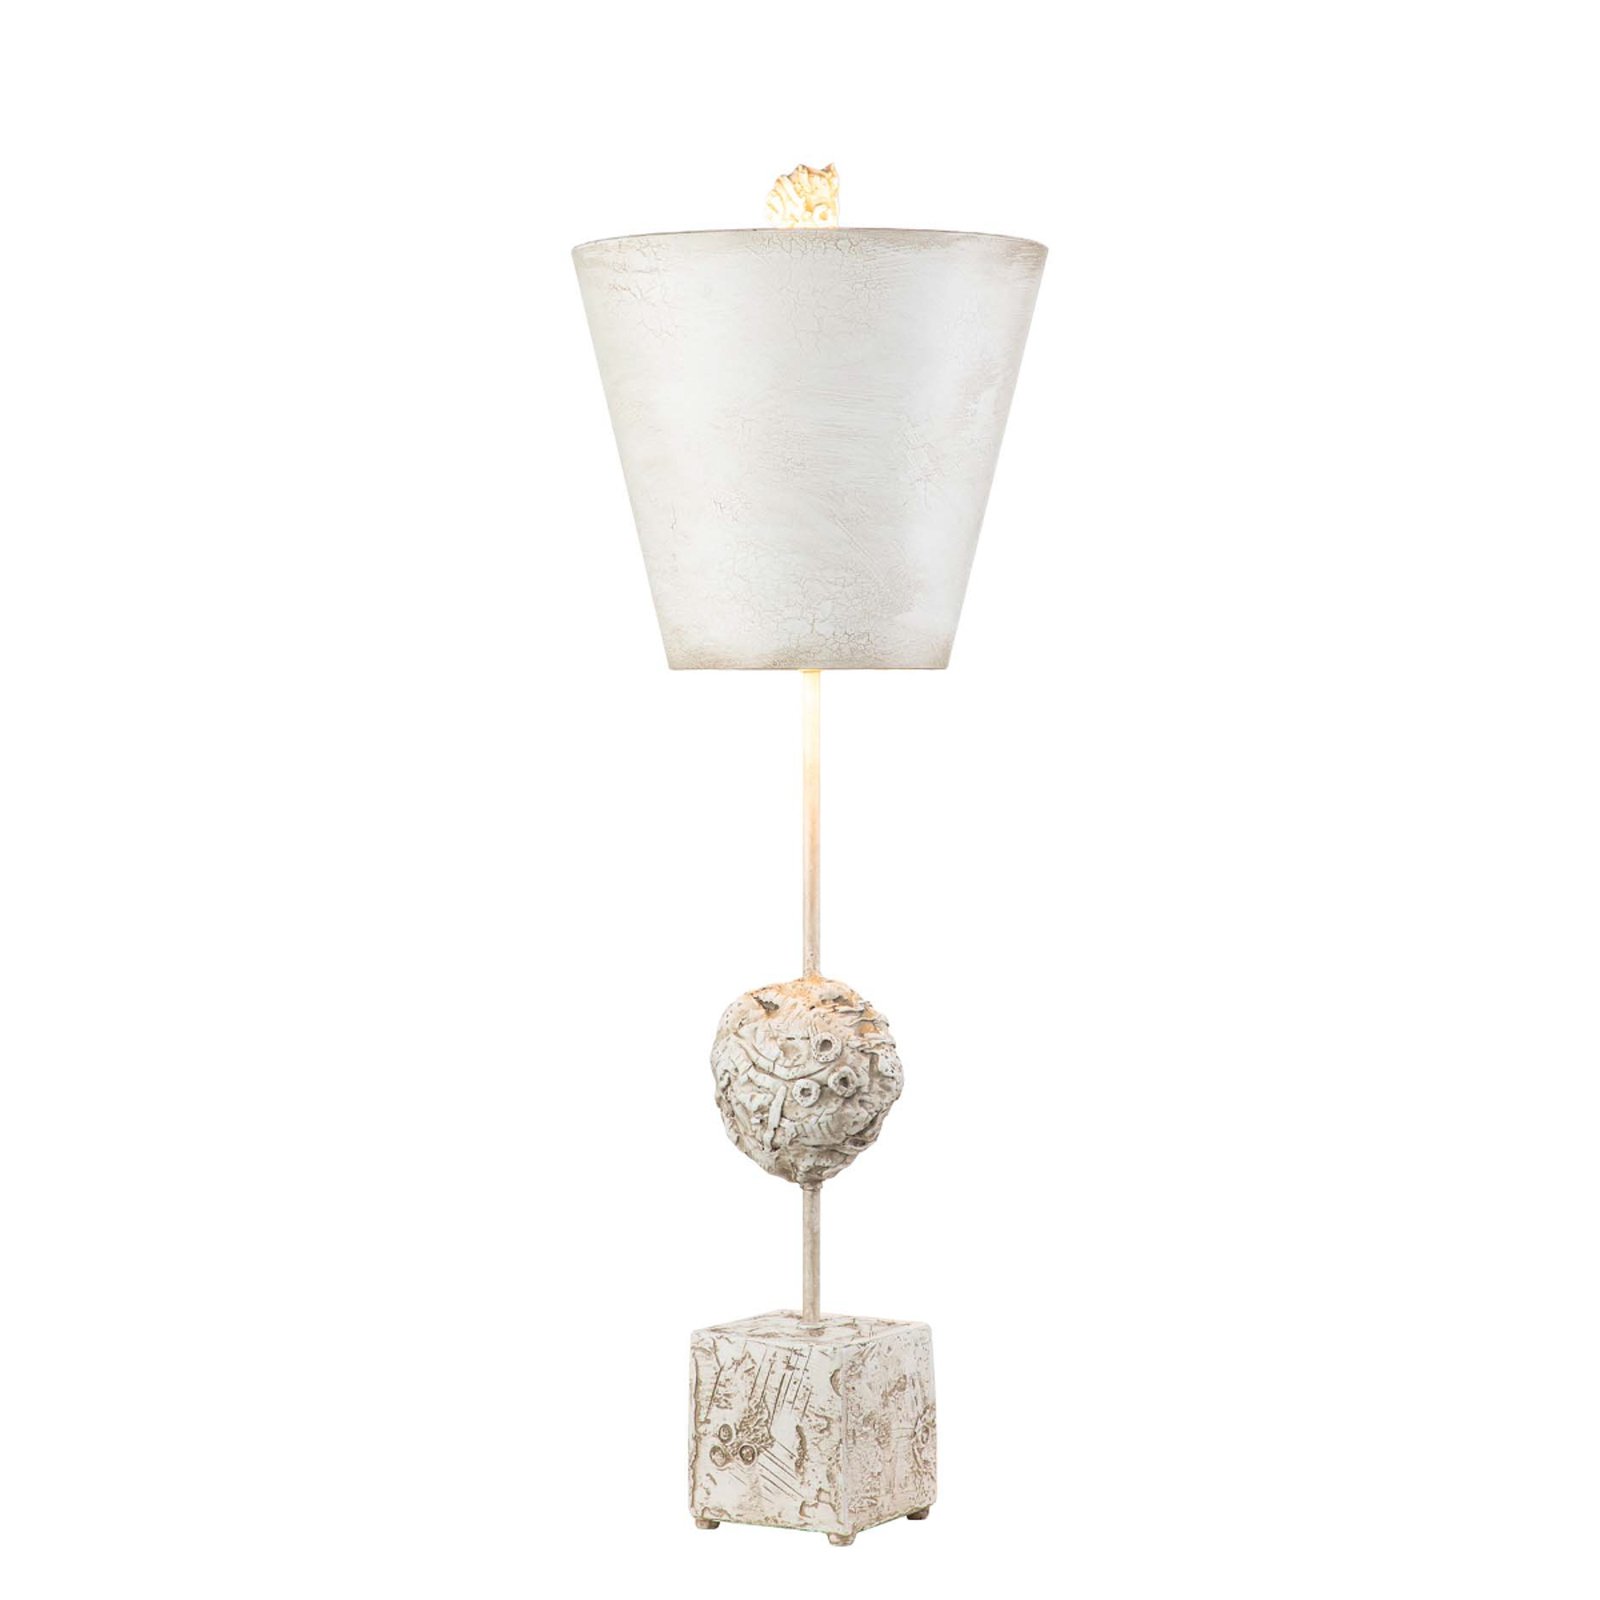 Petra table lamp in antique white